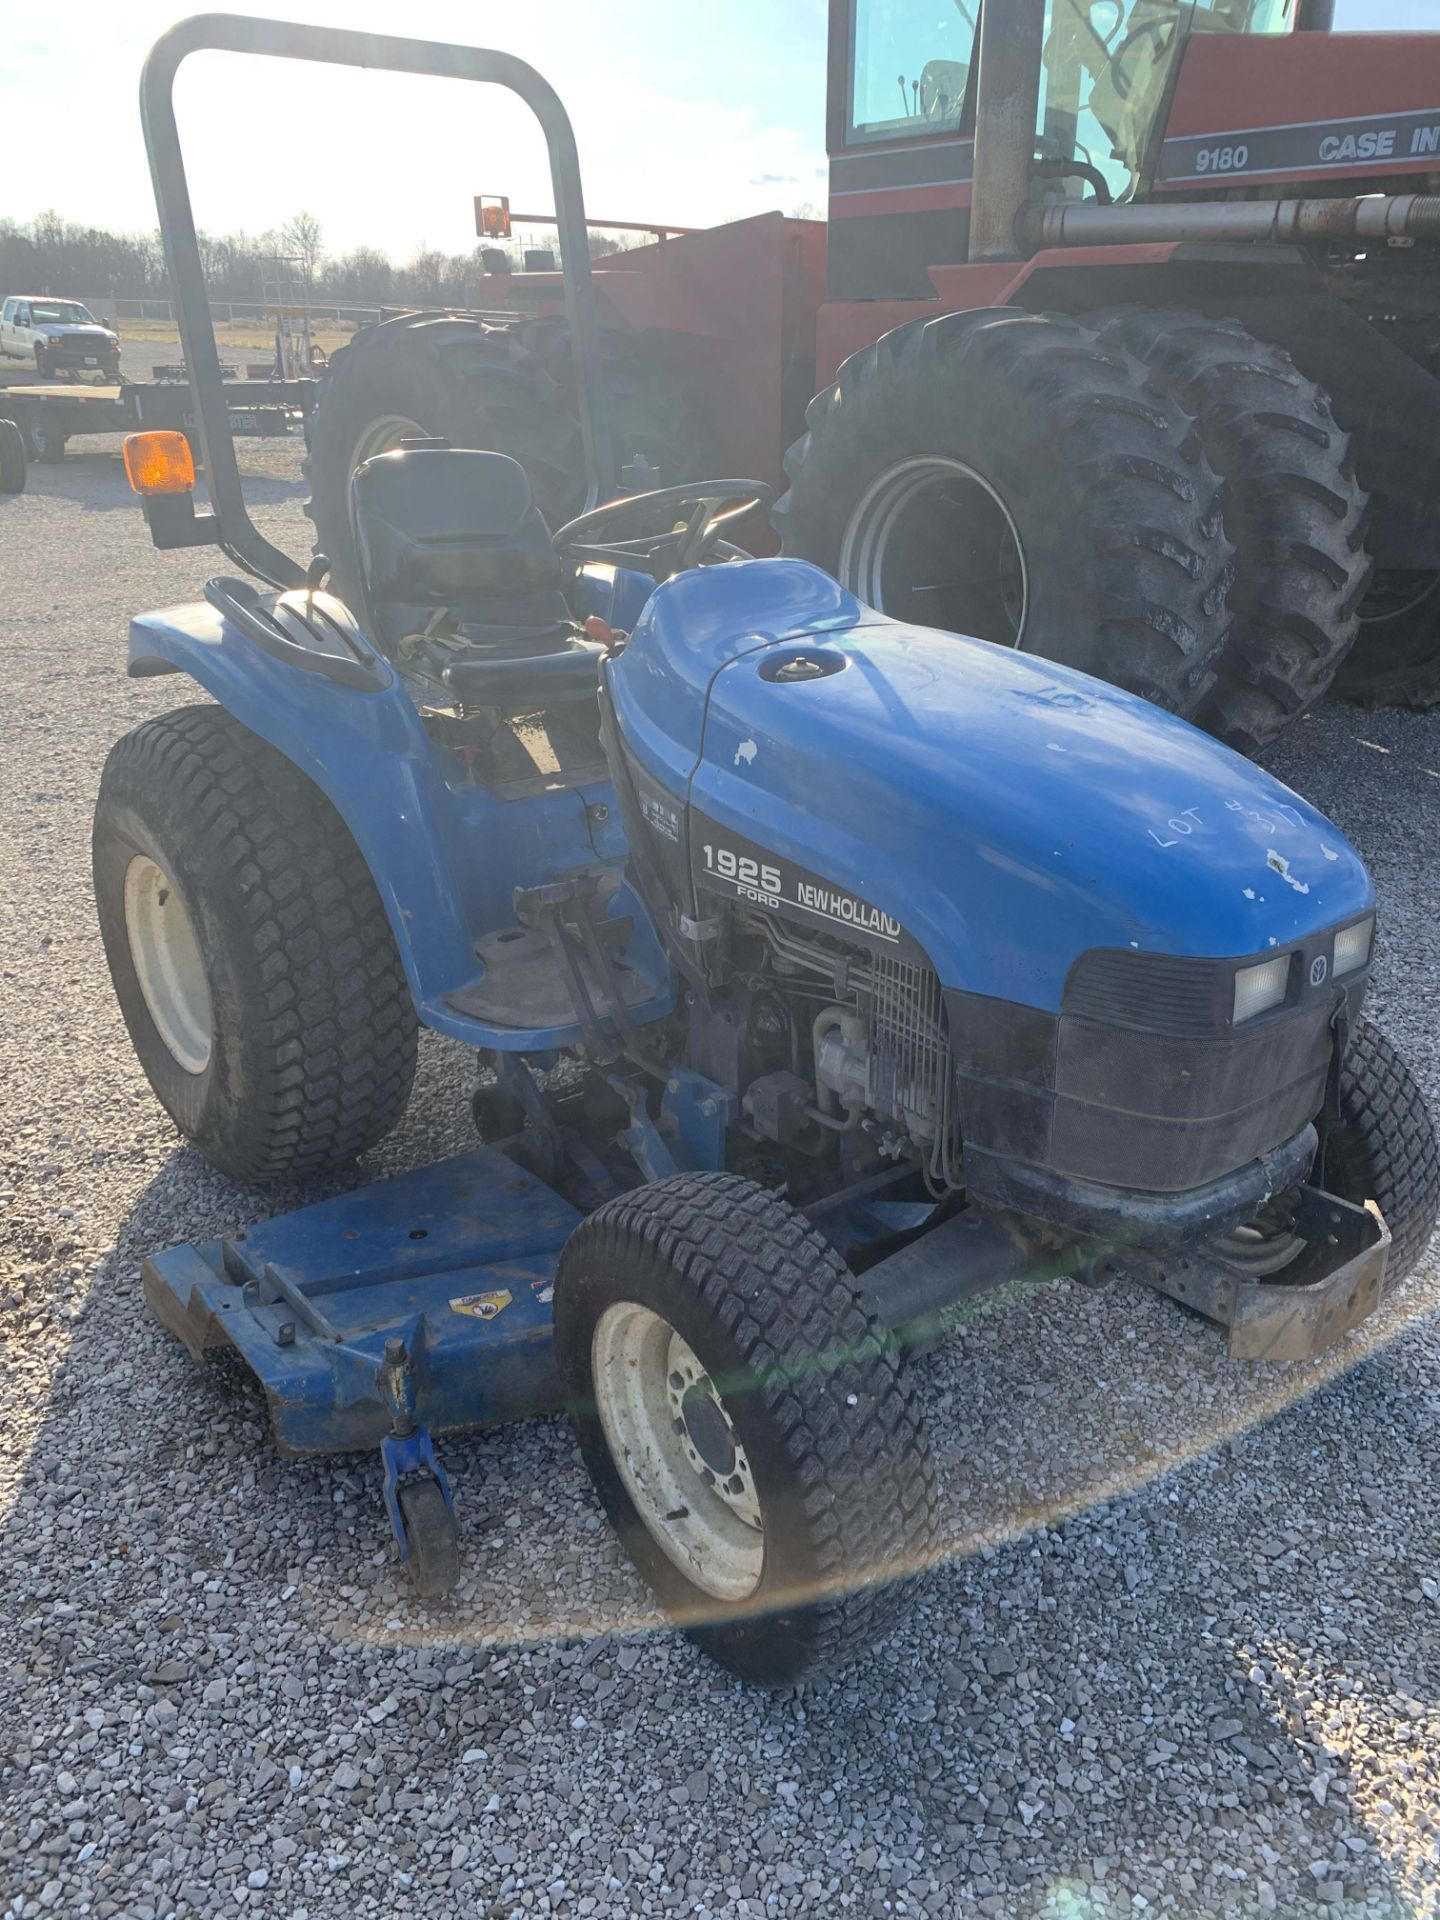 1998 NEW HOLLAND 1925 TRACTOR, 4WD, 2380HRS, SER#G006032 with 1998 NEW HOLLAND 914A 6' MOWER DECK,